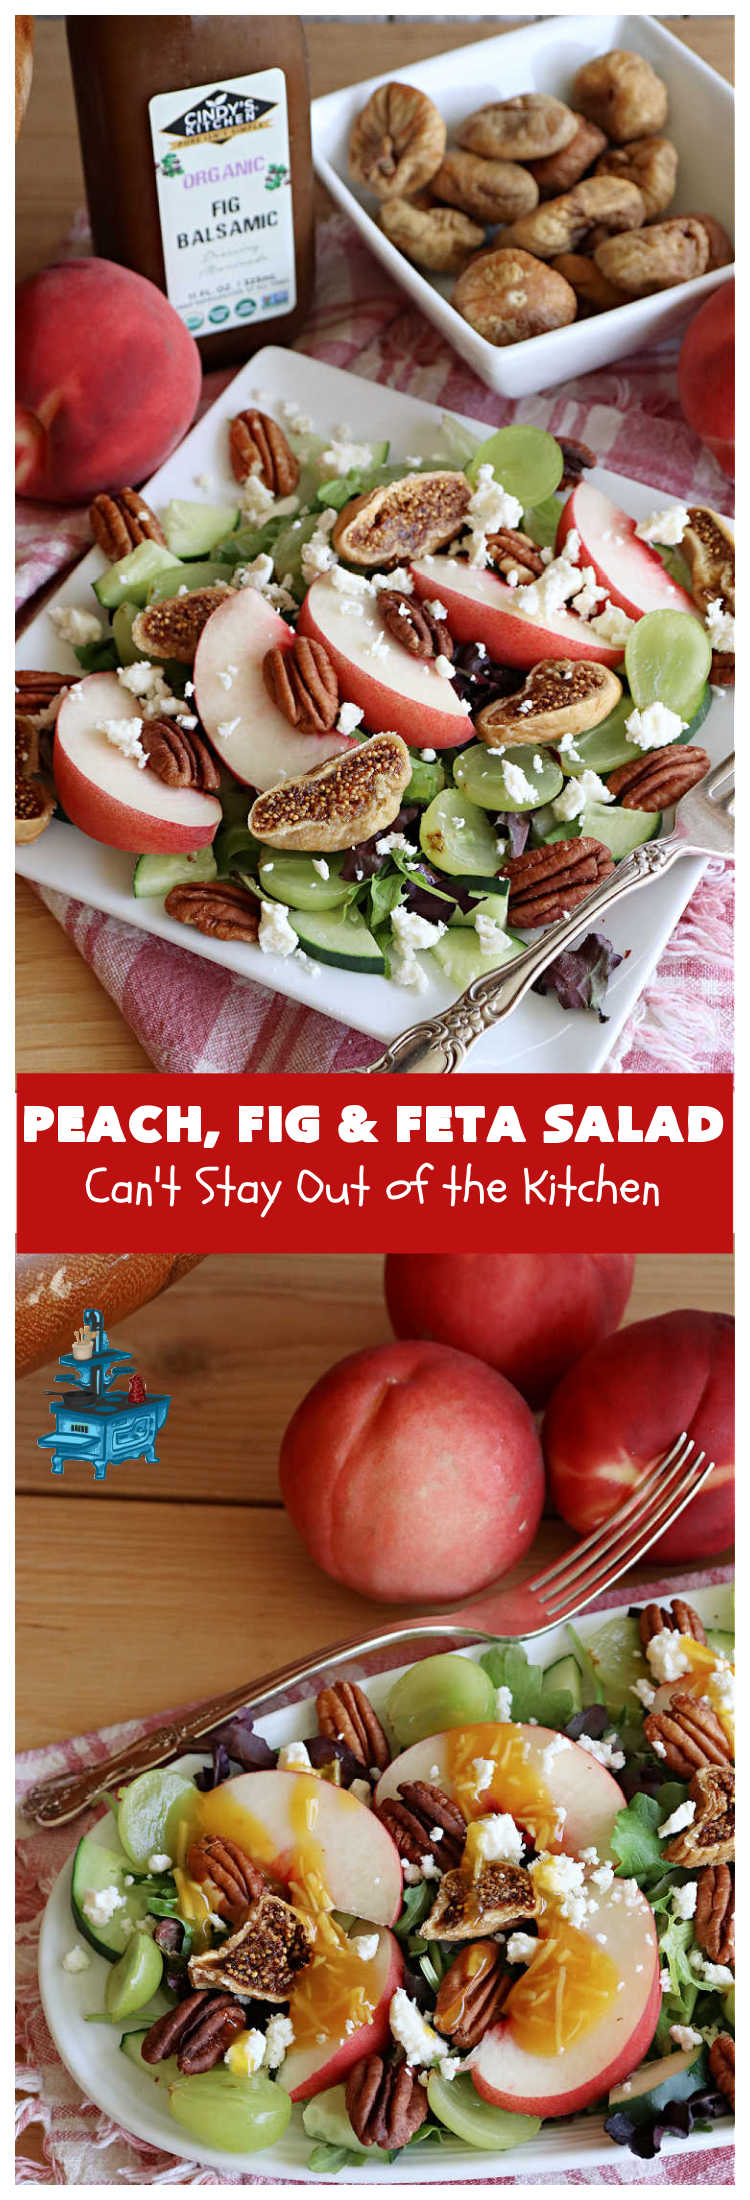 Peach, Fig & Feta Salad | Can't Stay Out of the Kitchen | this delicious gourmet-type #salad is fantastic for company or #holiday dinners. The sweetness comes from #peaches, #figs & #grapes. The savory flavors come from #FetaCheese & roasted #pecans. #Healthy #LowCalorie #GlutenFree #PeachFigAndFetaSalad